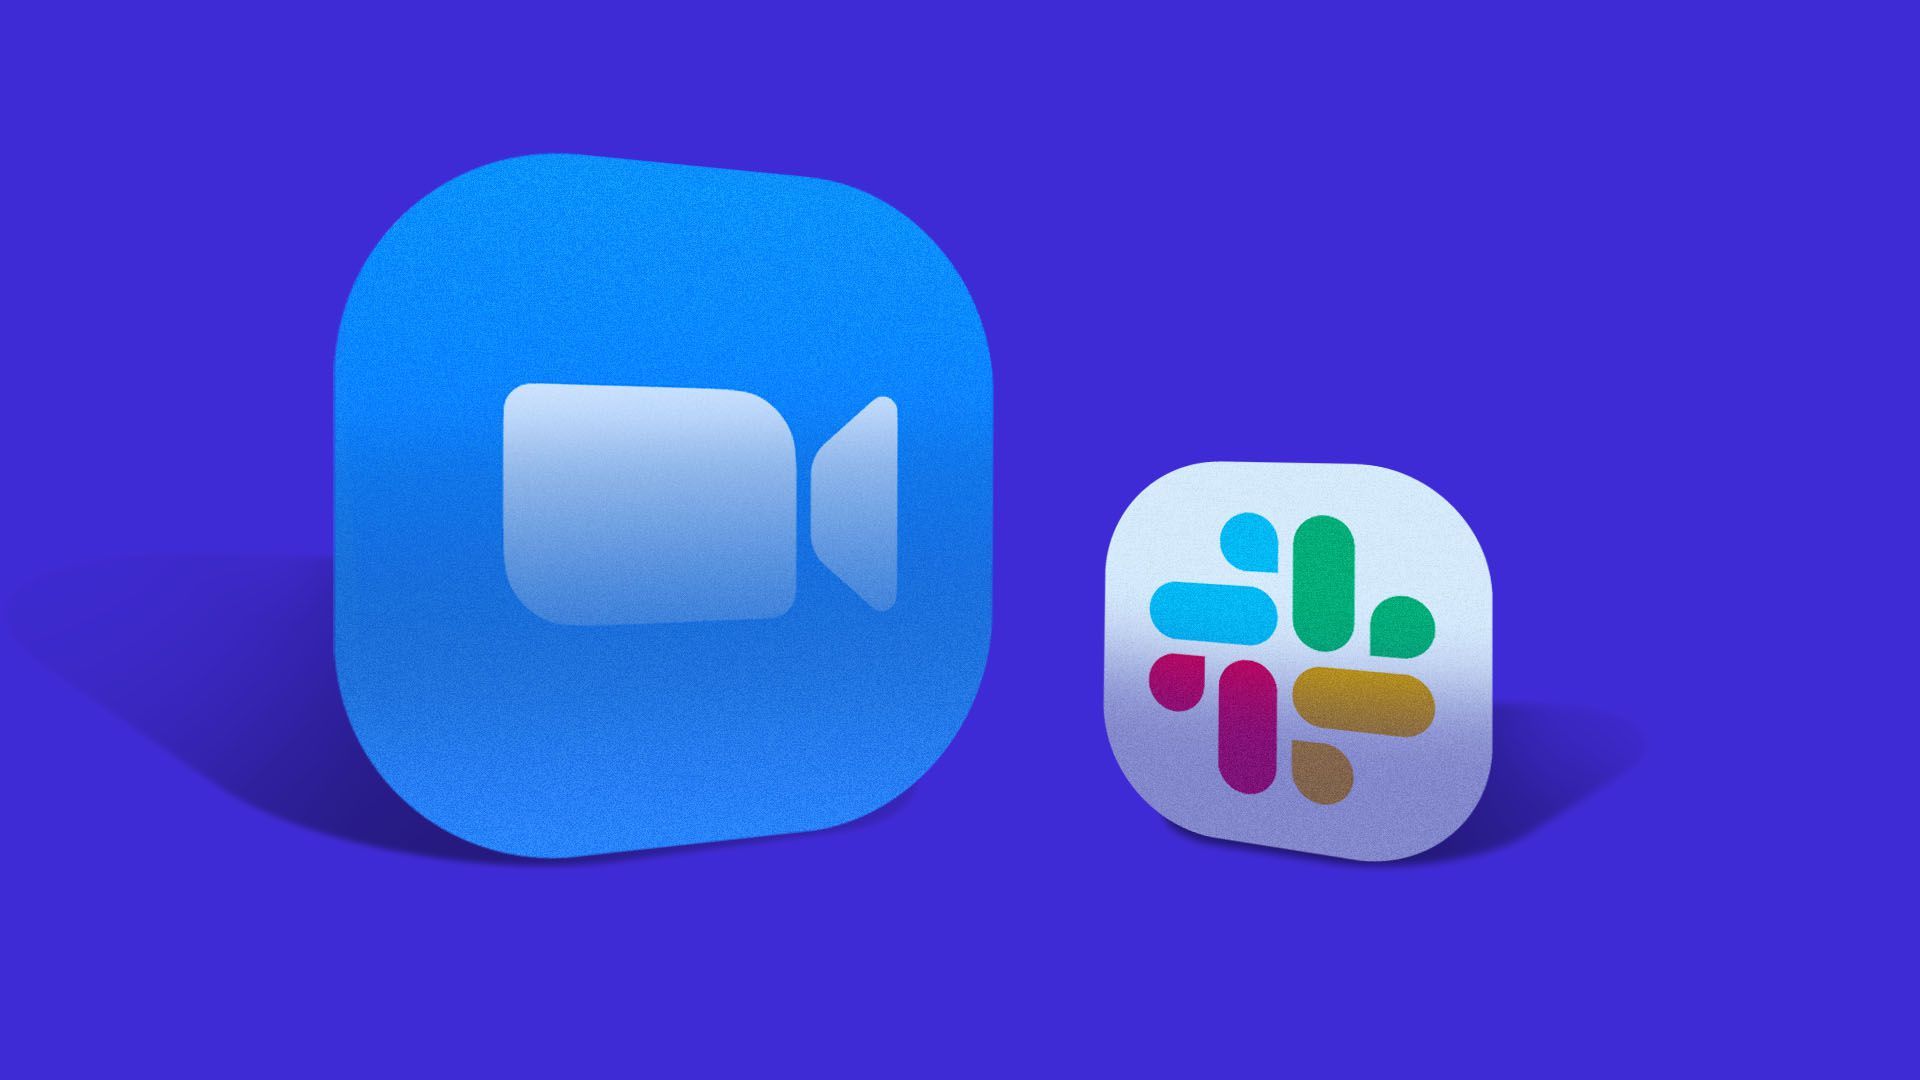 Illustration of a large Zoom app icon next to a small Slack app icon